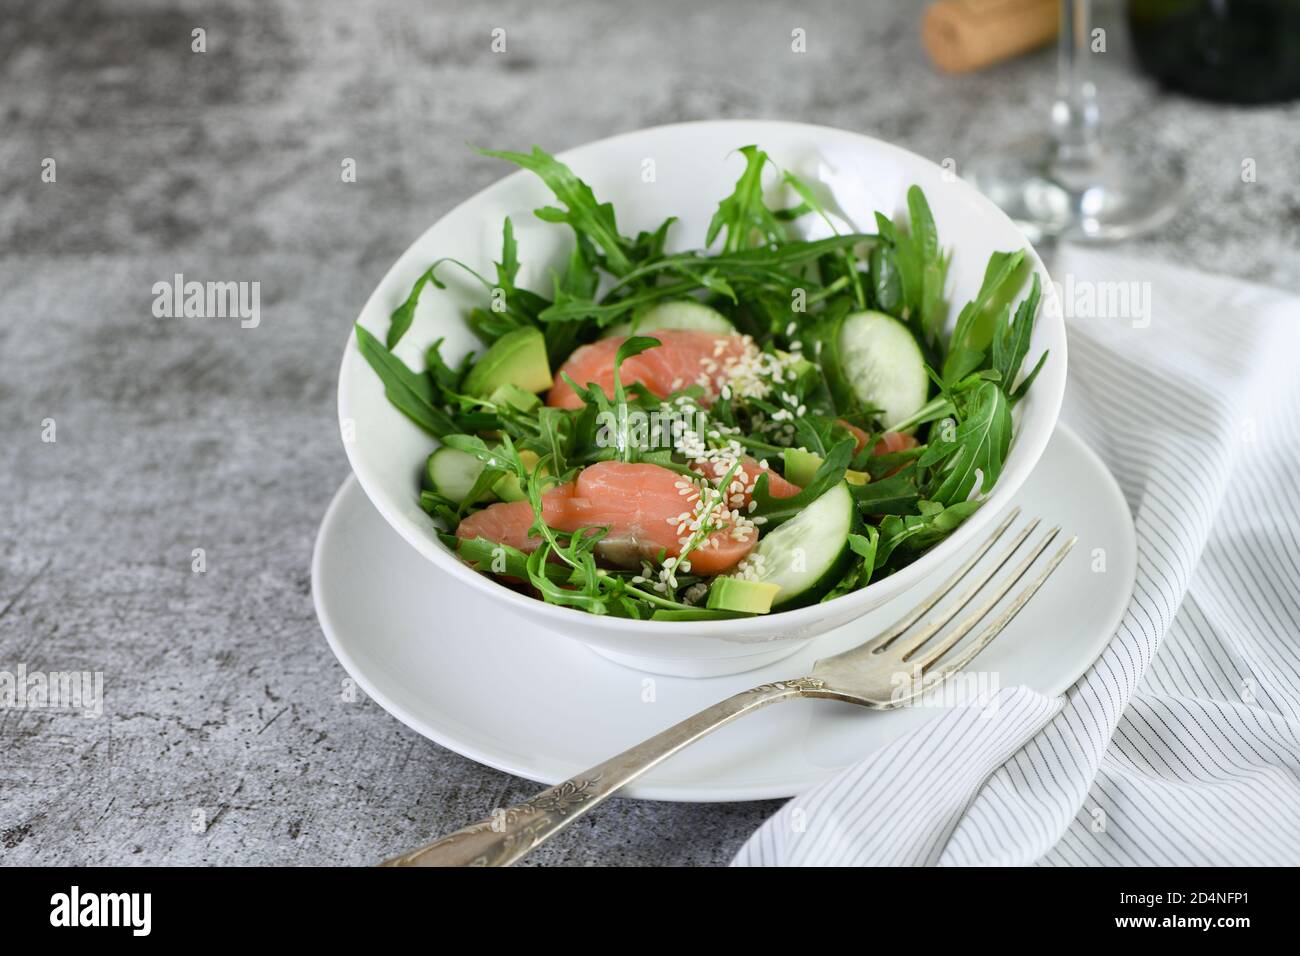 Vegetable salad from arugula, avocado and cucumber pieces with the addition of tender salted salmon, seasoned sesame seeds Stock Photo